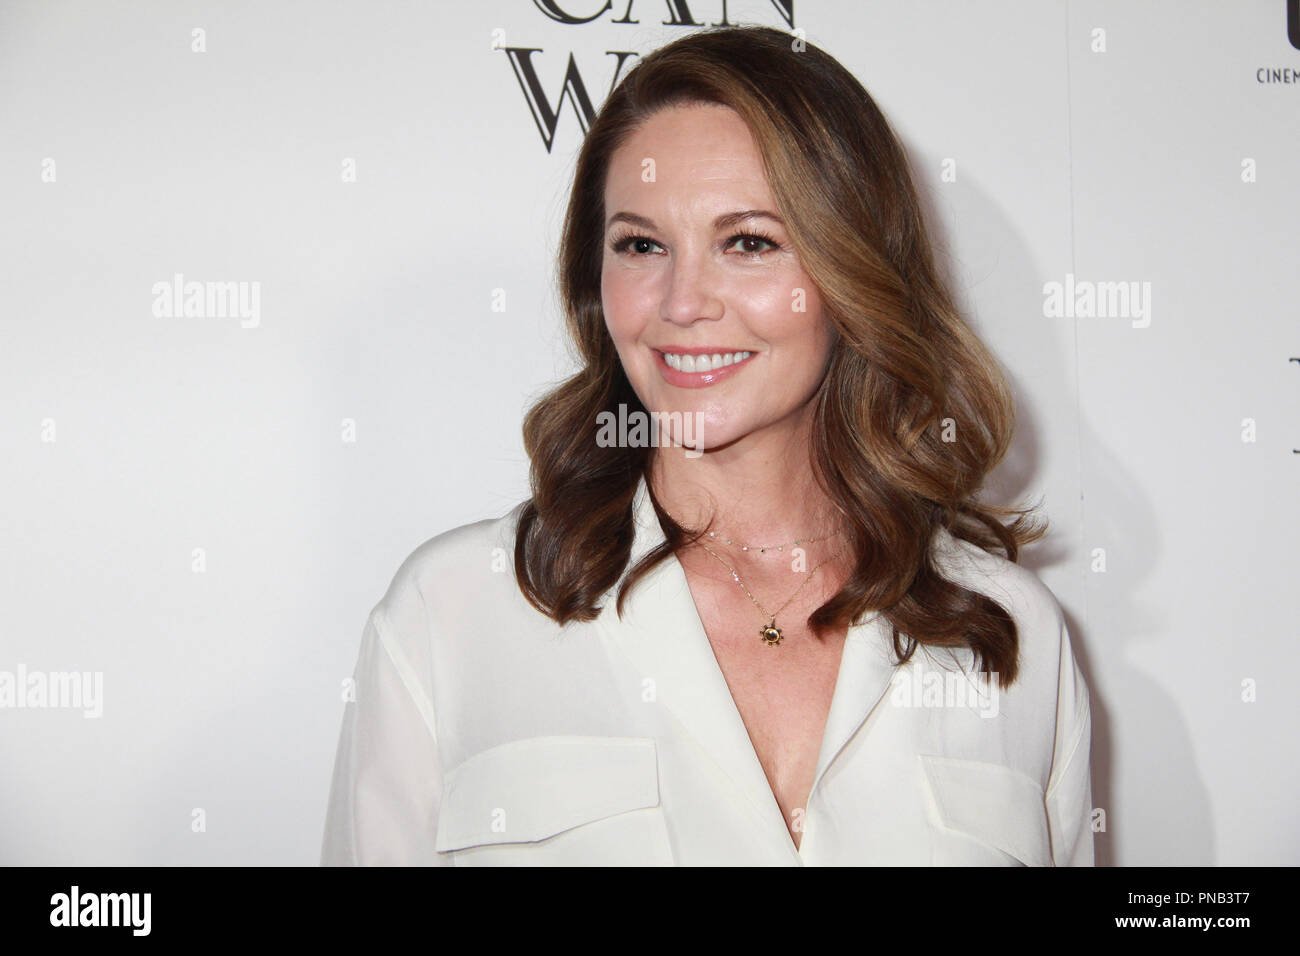 Diane Lane  05/11/2017 The Los Angeles Special Screening of 'Paris Can Wait' held at the Pacific Design Center Silver Screen Theatre in West Hollywood, CA Photo by Izumi Hasegawa / HNW / PictureLux Stock Photo